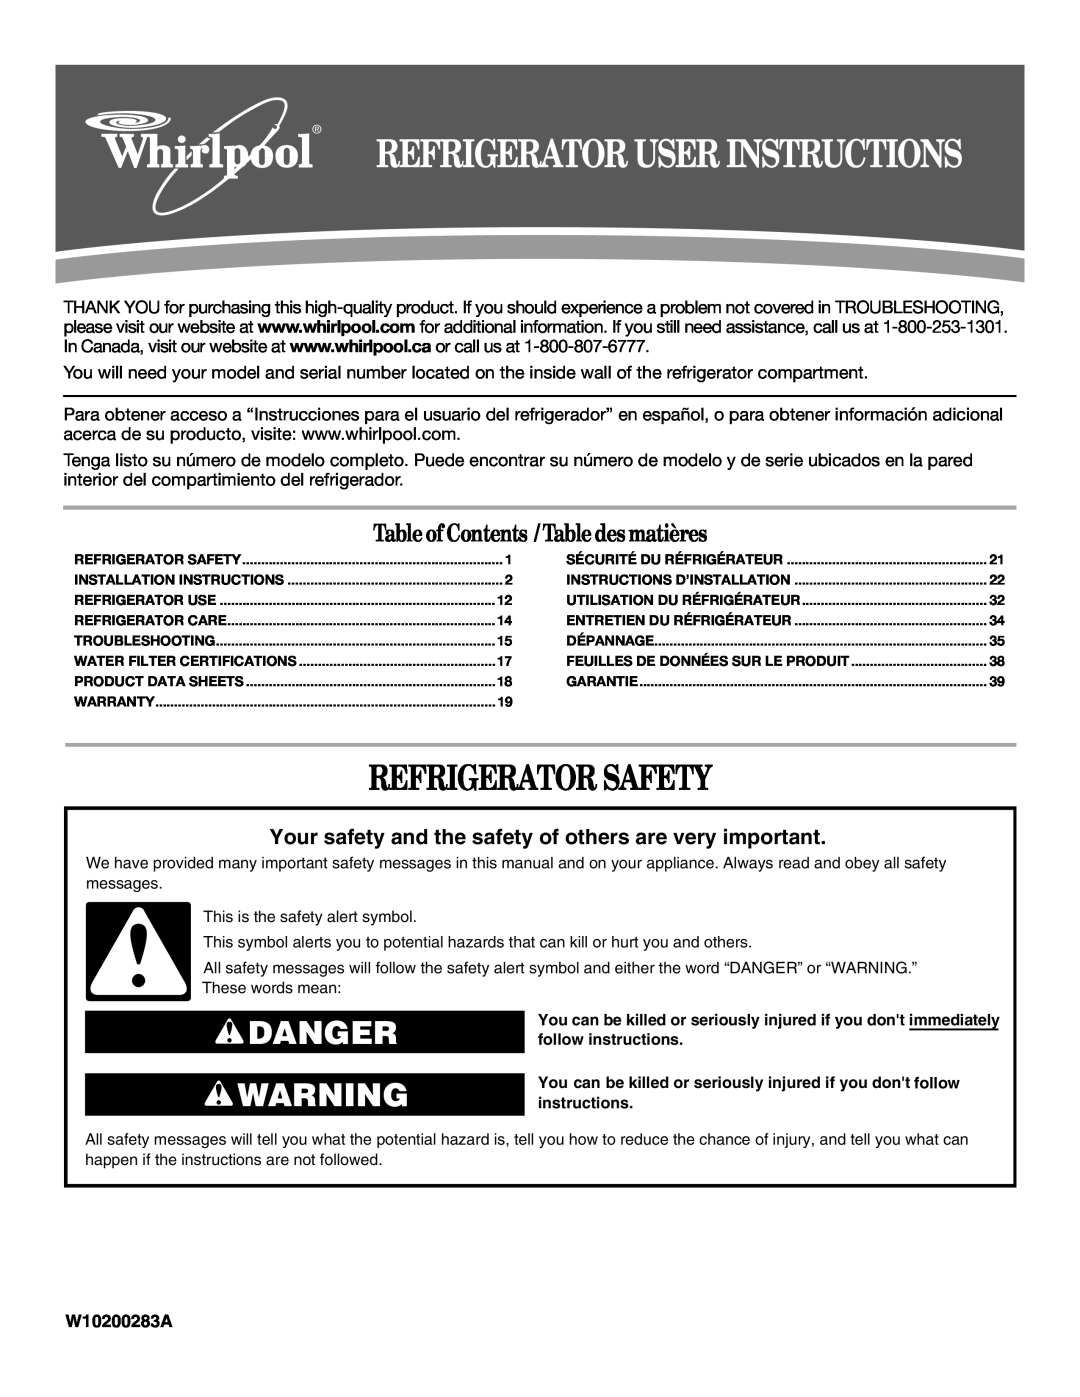 Whirlpool W10200284A installation instructions Refrigerator Safety, Danger, Table of Contents / Table desmatières 